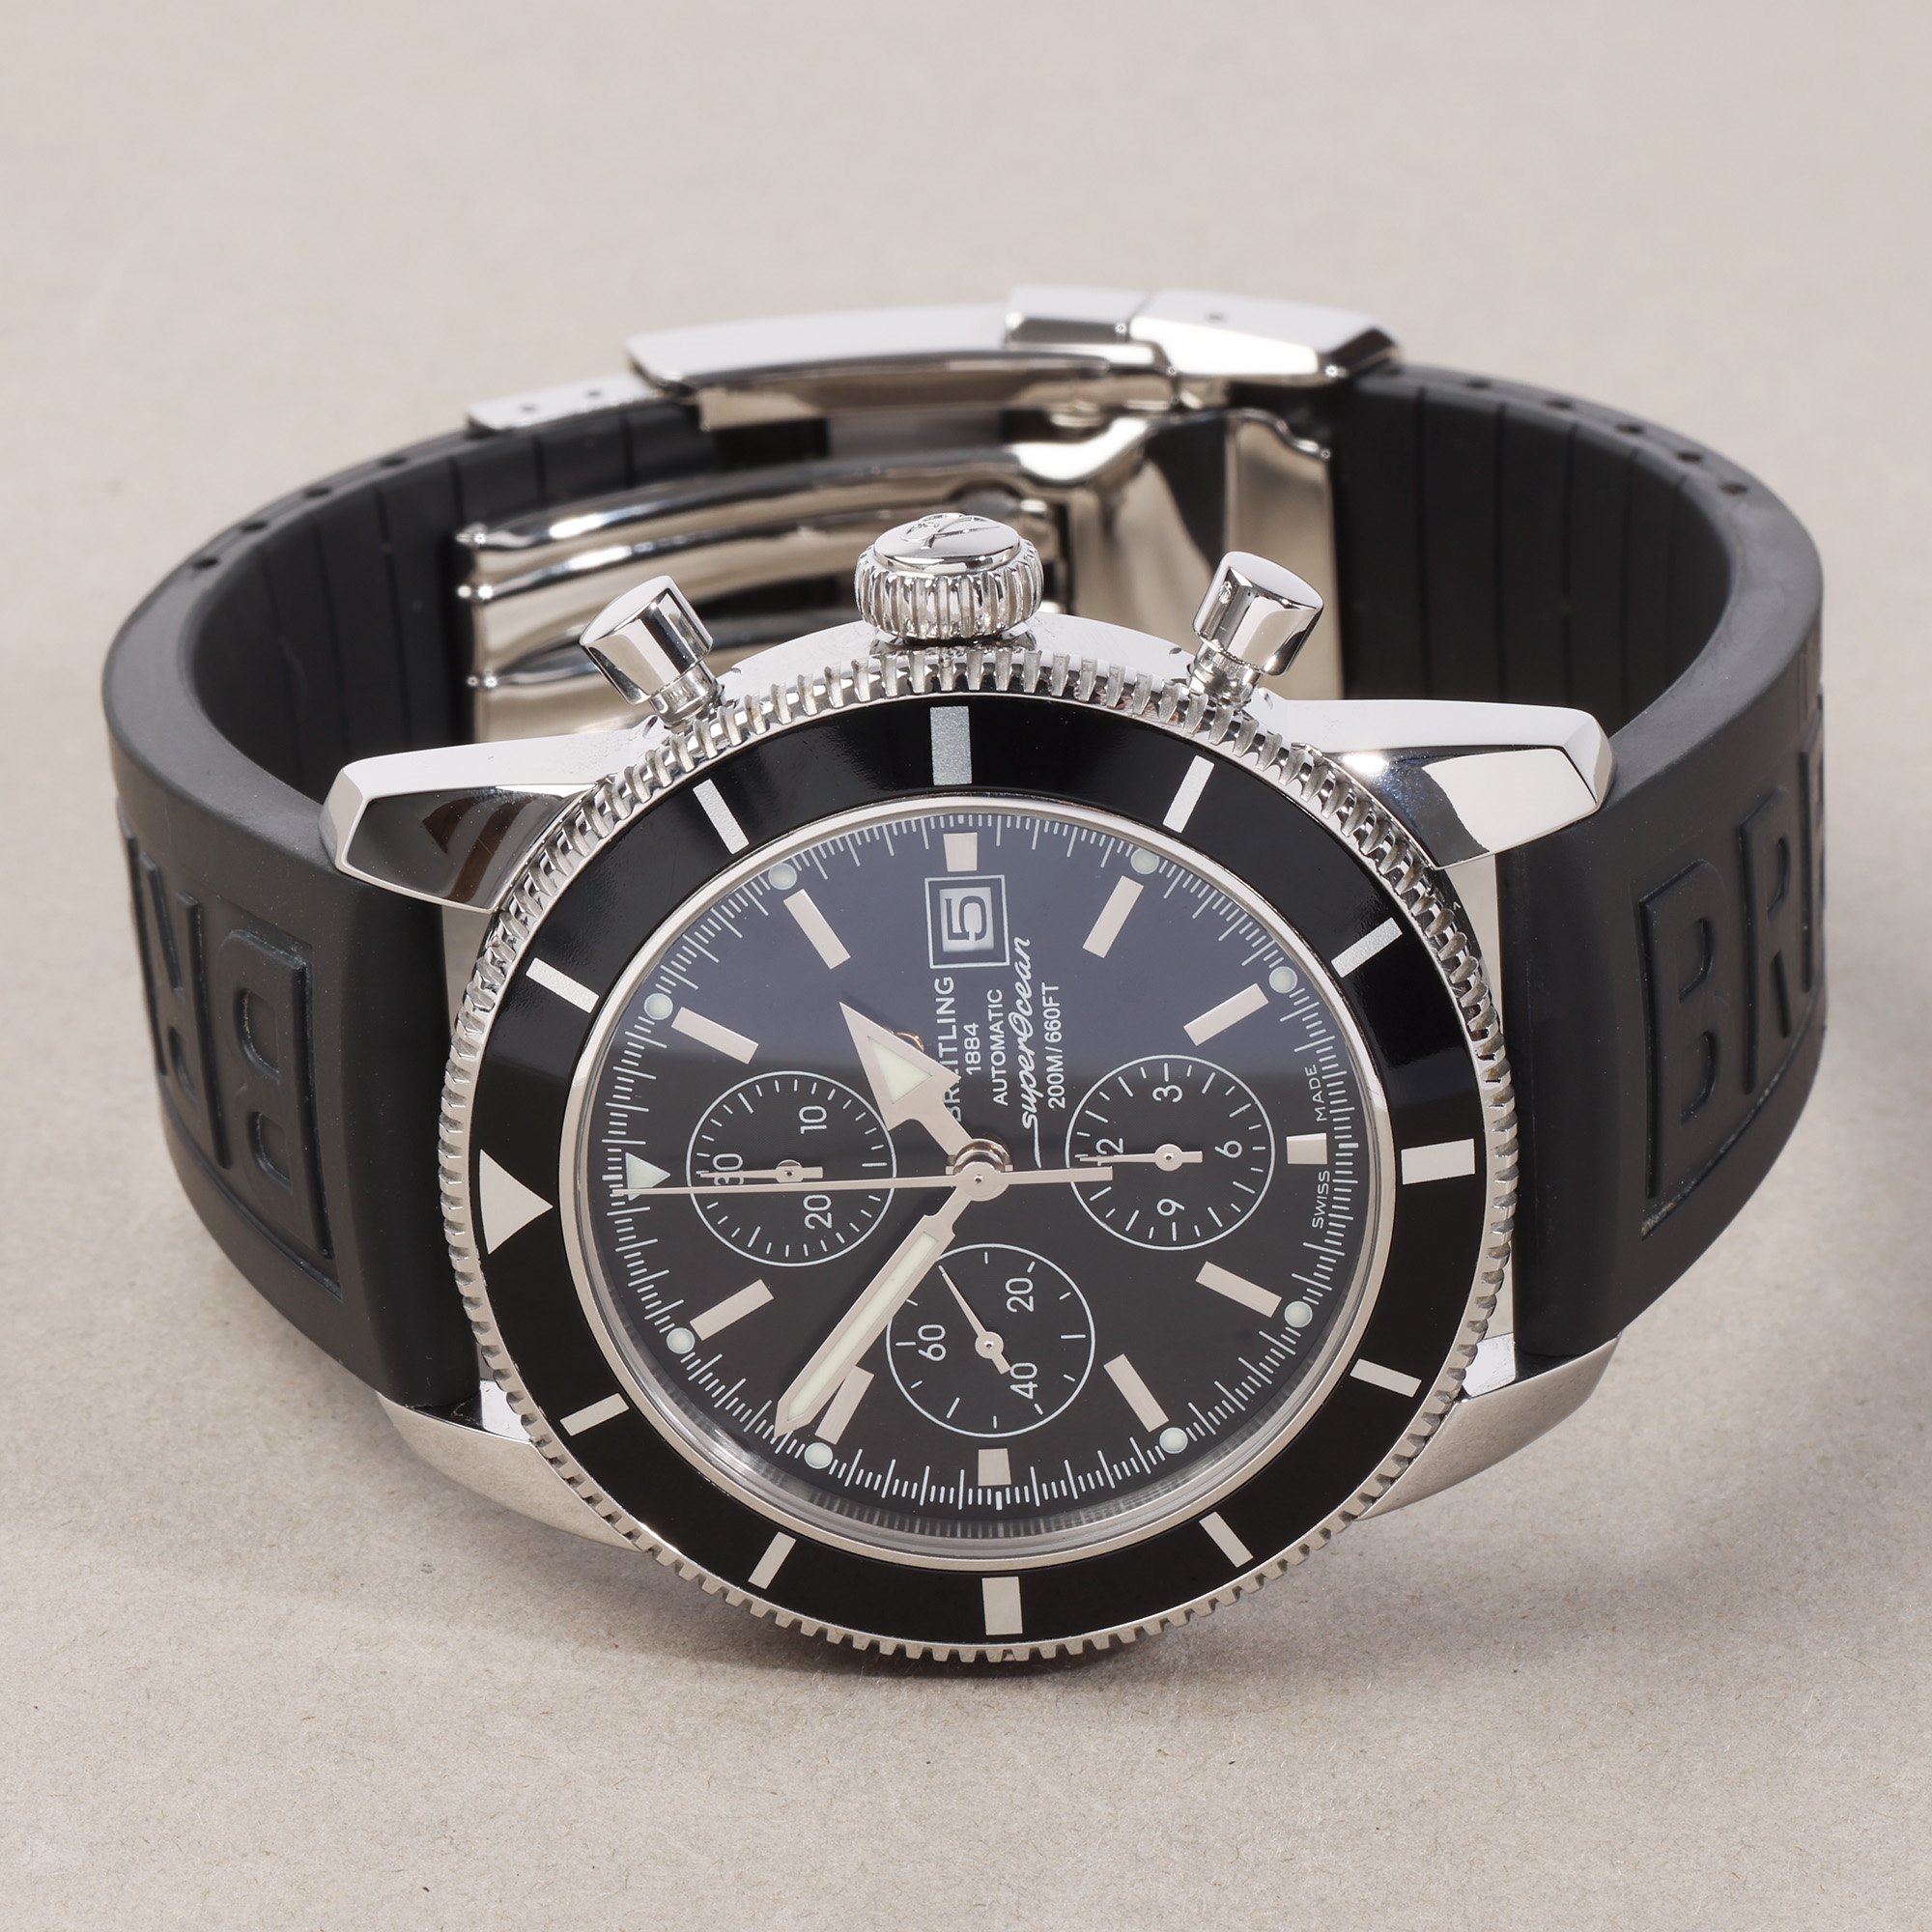 Breitling Superocean Heritage Chronograph Stainless Steel A1332024/B908